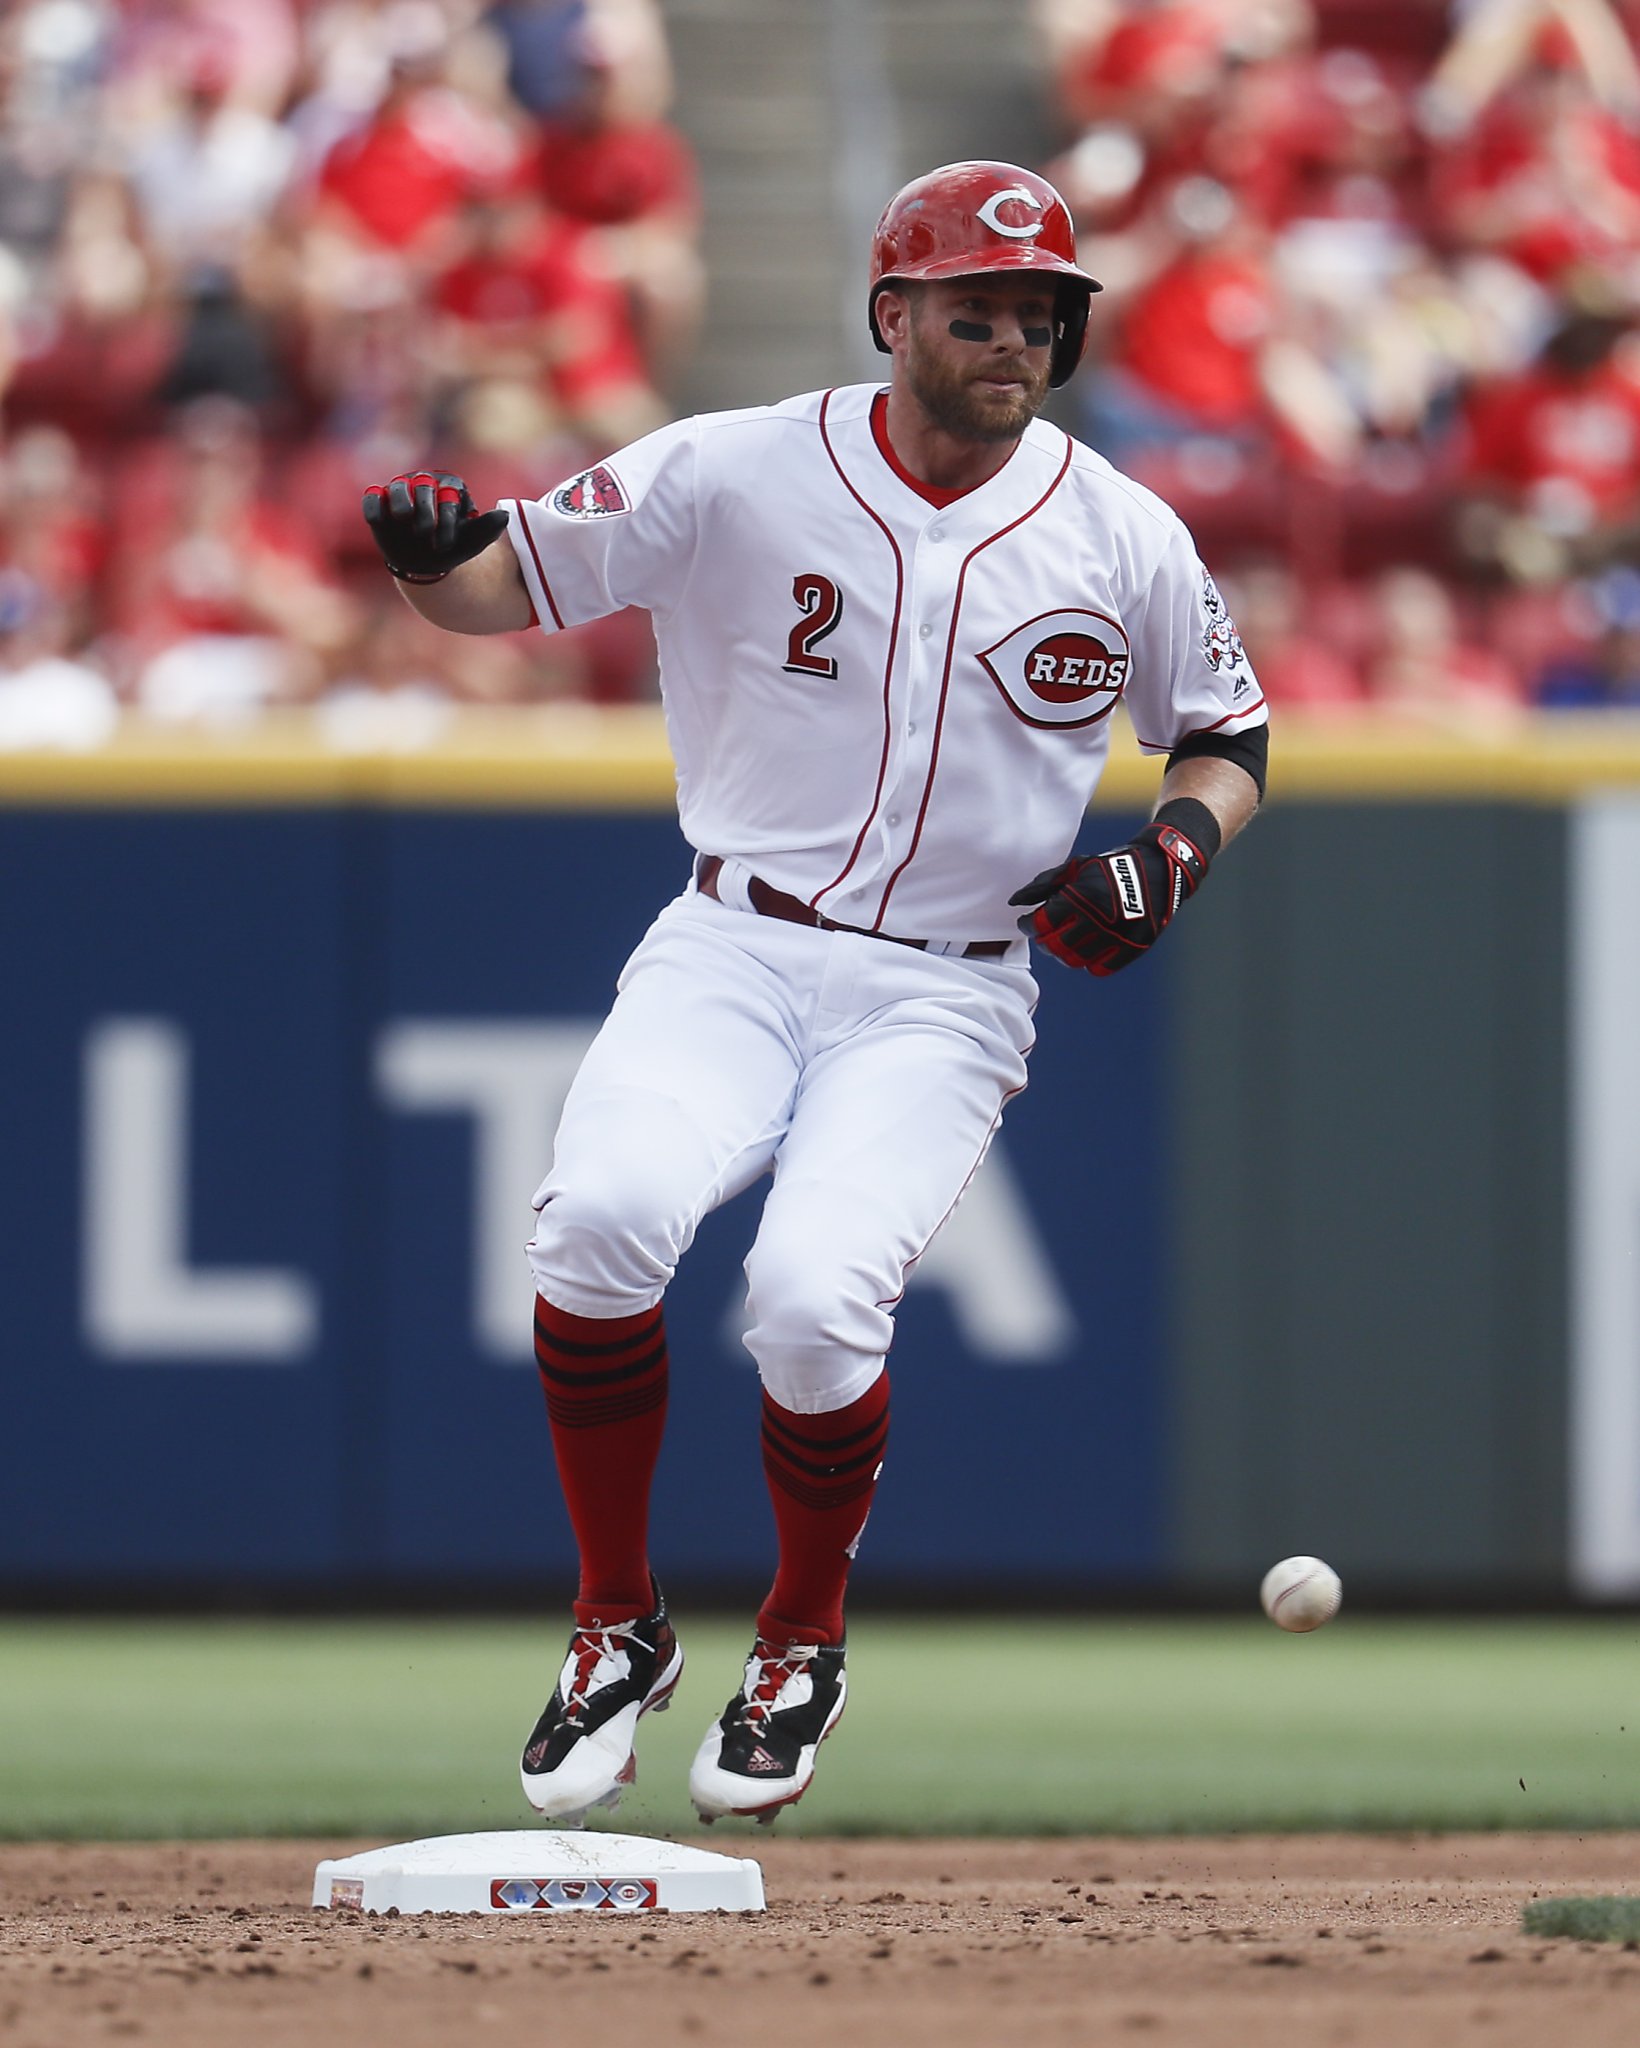 Zack Cozart is bringing the donkey Joey Votto gave him to California